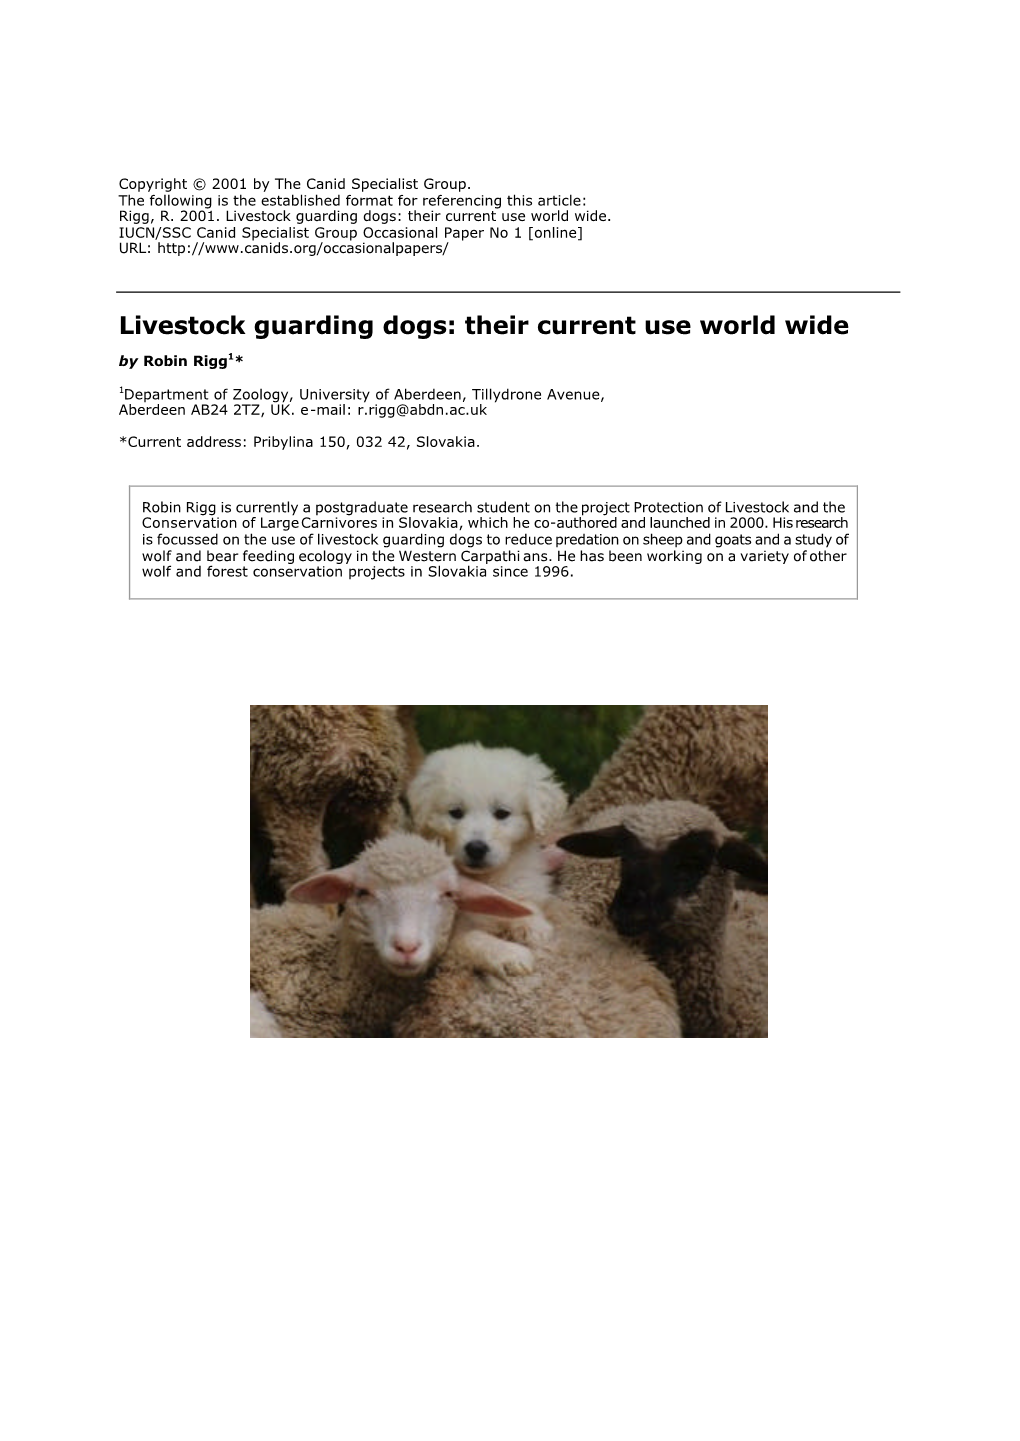 Livestock Guarding Dogs: Their Current Use World Wide